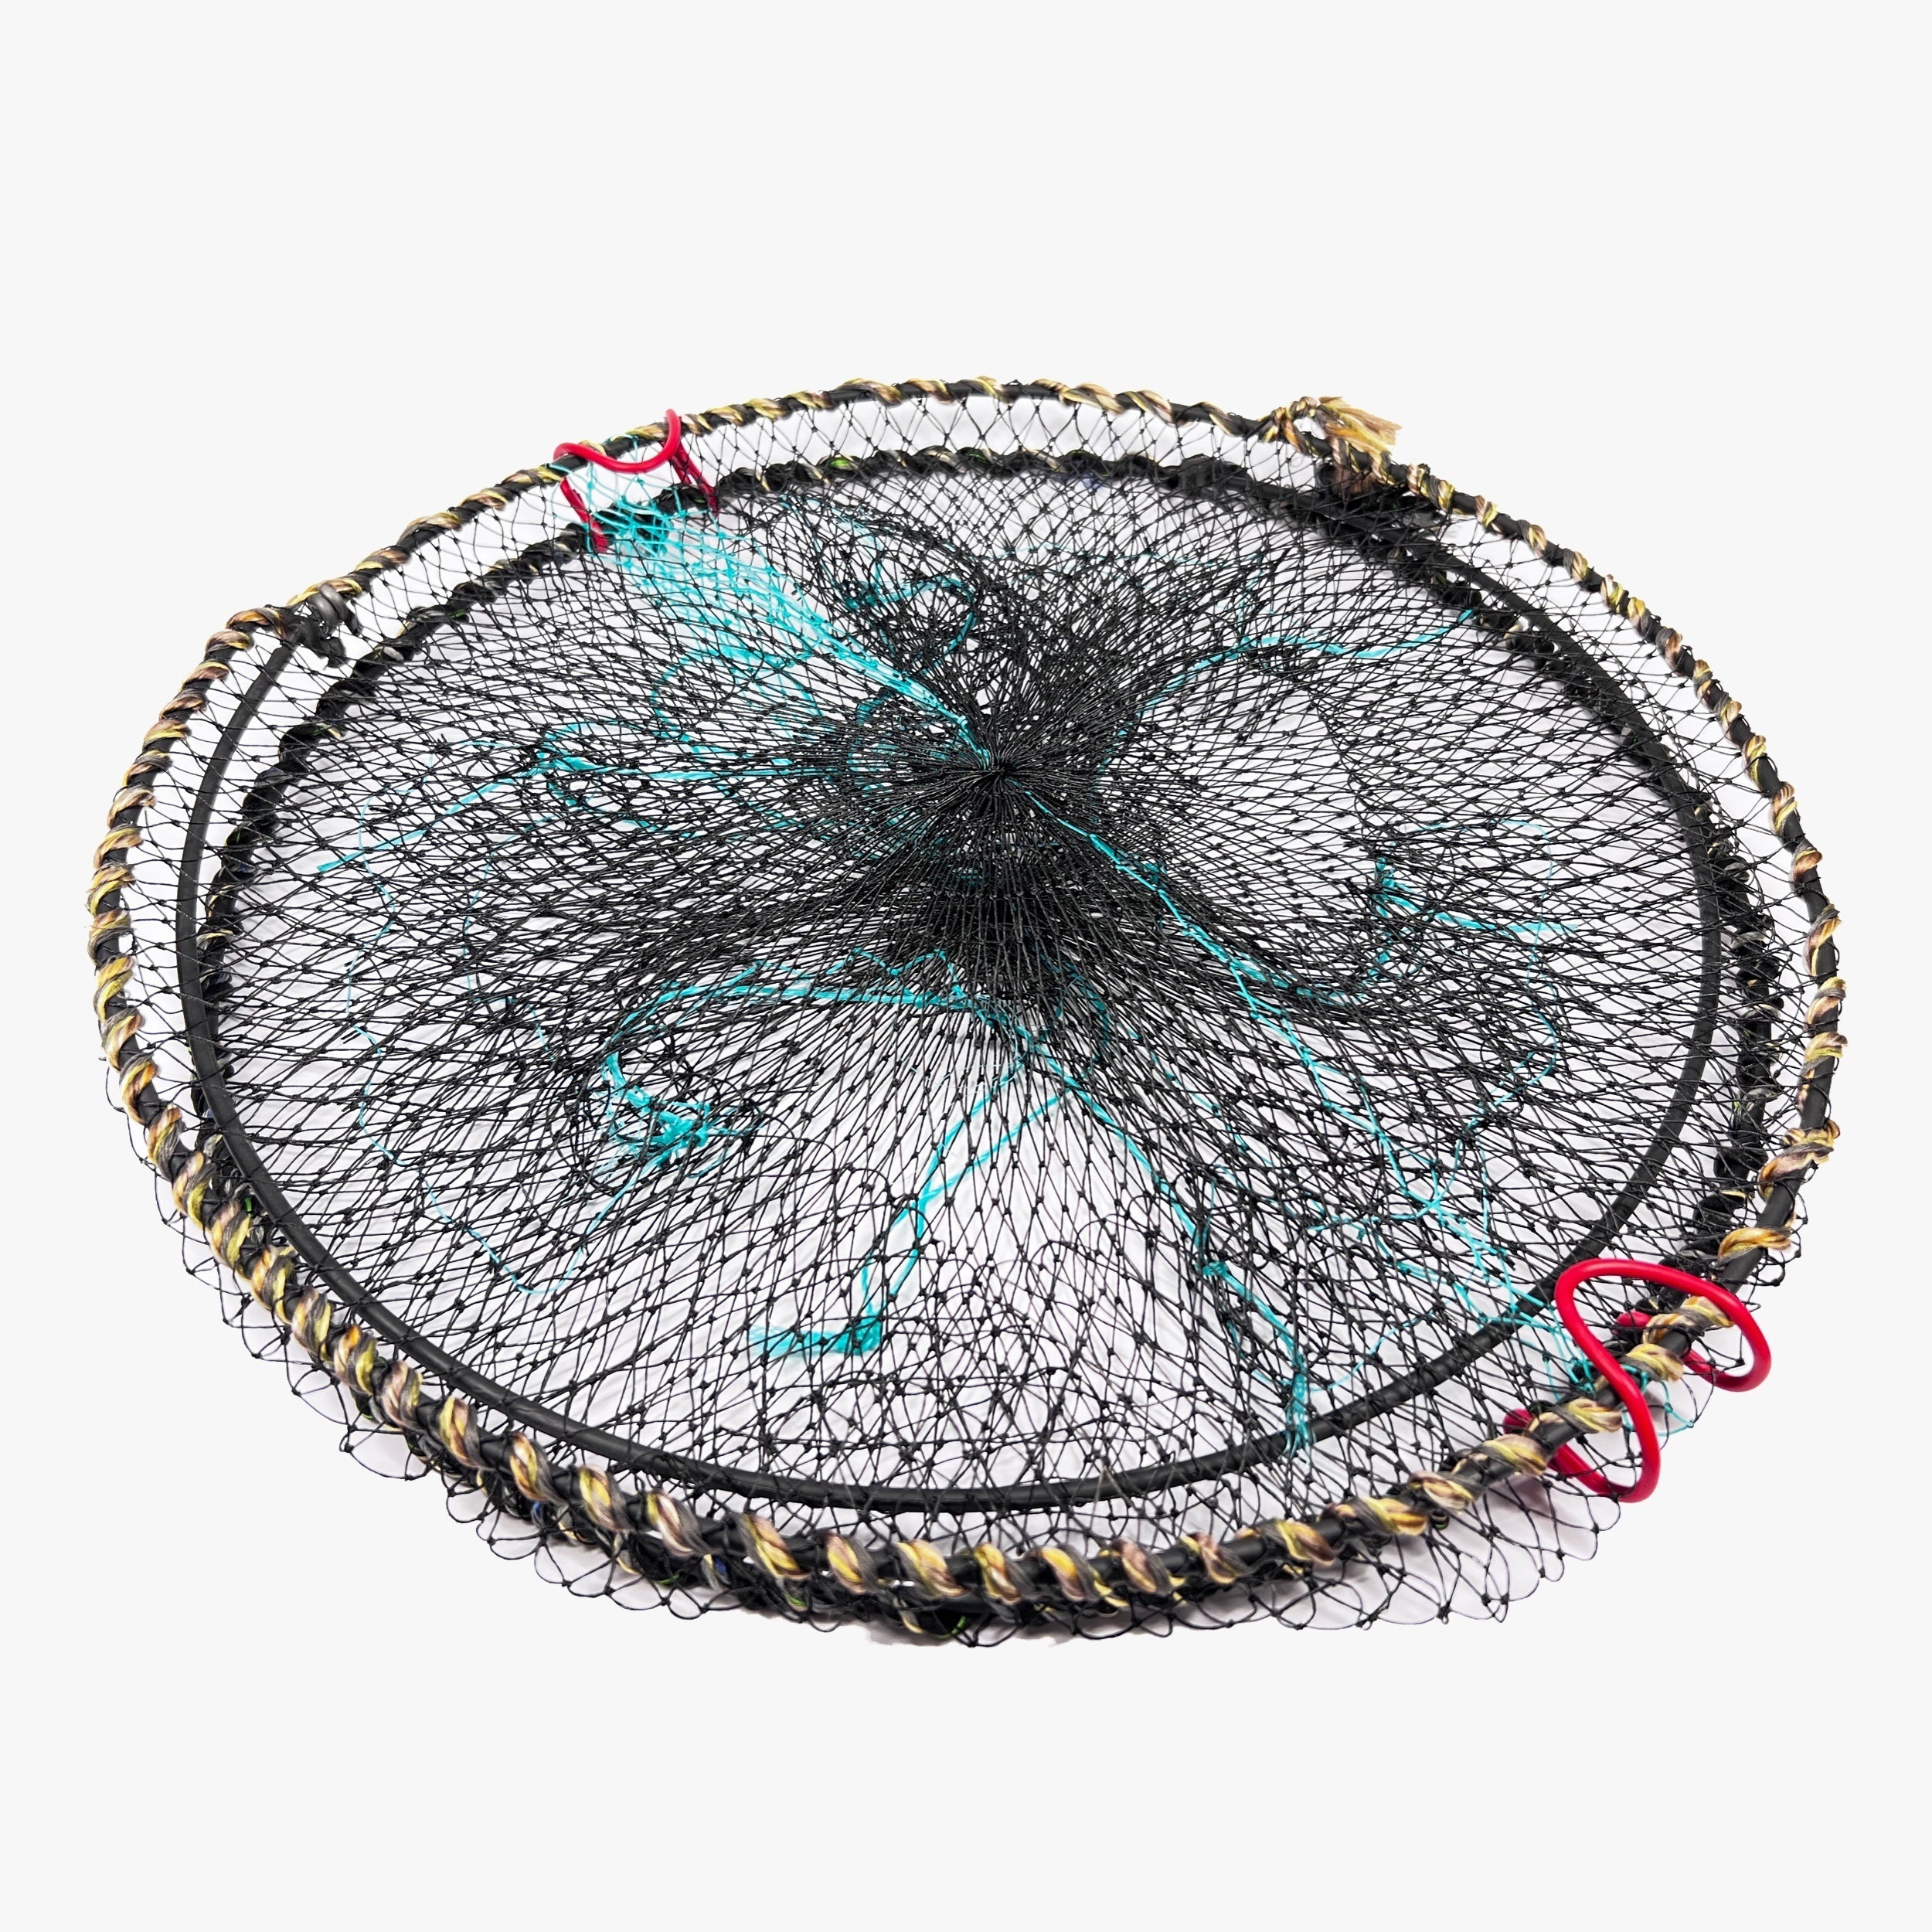 Baluue Yellow Eel and Shrimp Cage Small Lobster Net Foldable Fishing Bait  Crab Pots for Crabbing Minnow Crawfish Tool Stand Crayfish Eel Fishing Bait  Bass Bait Fishing Net Dedicated Pp : 